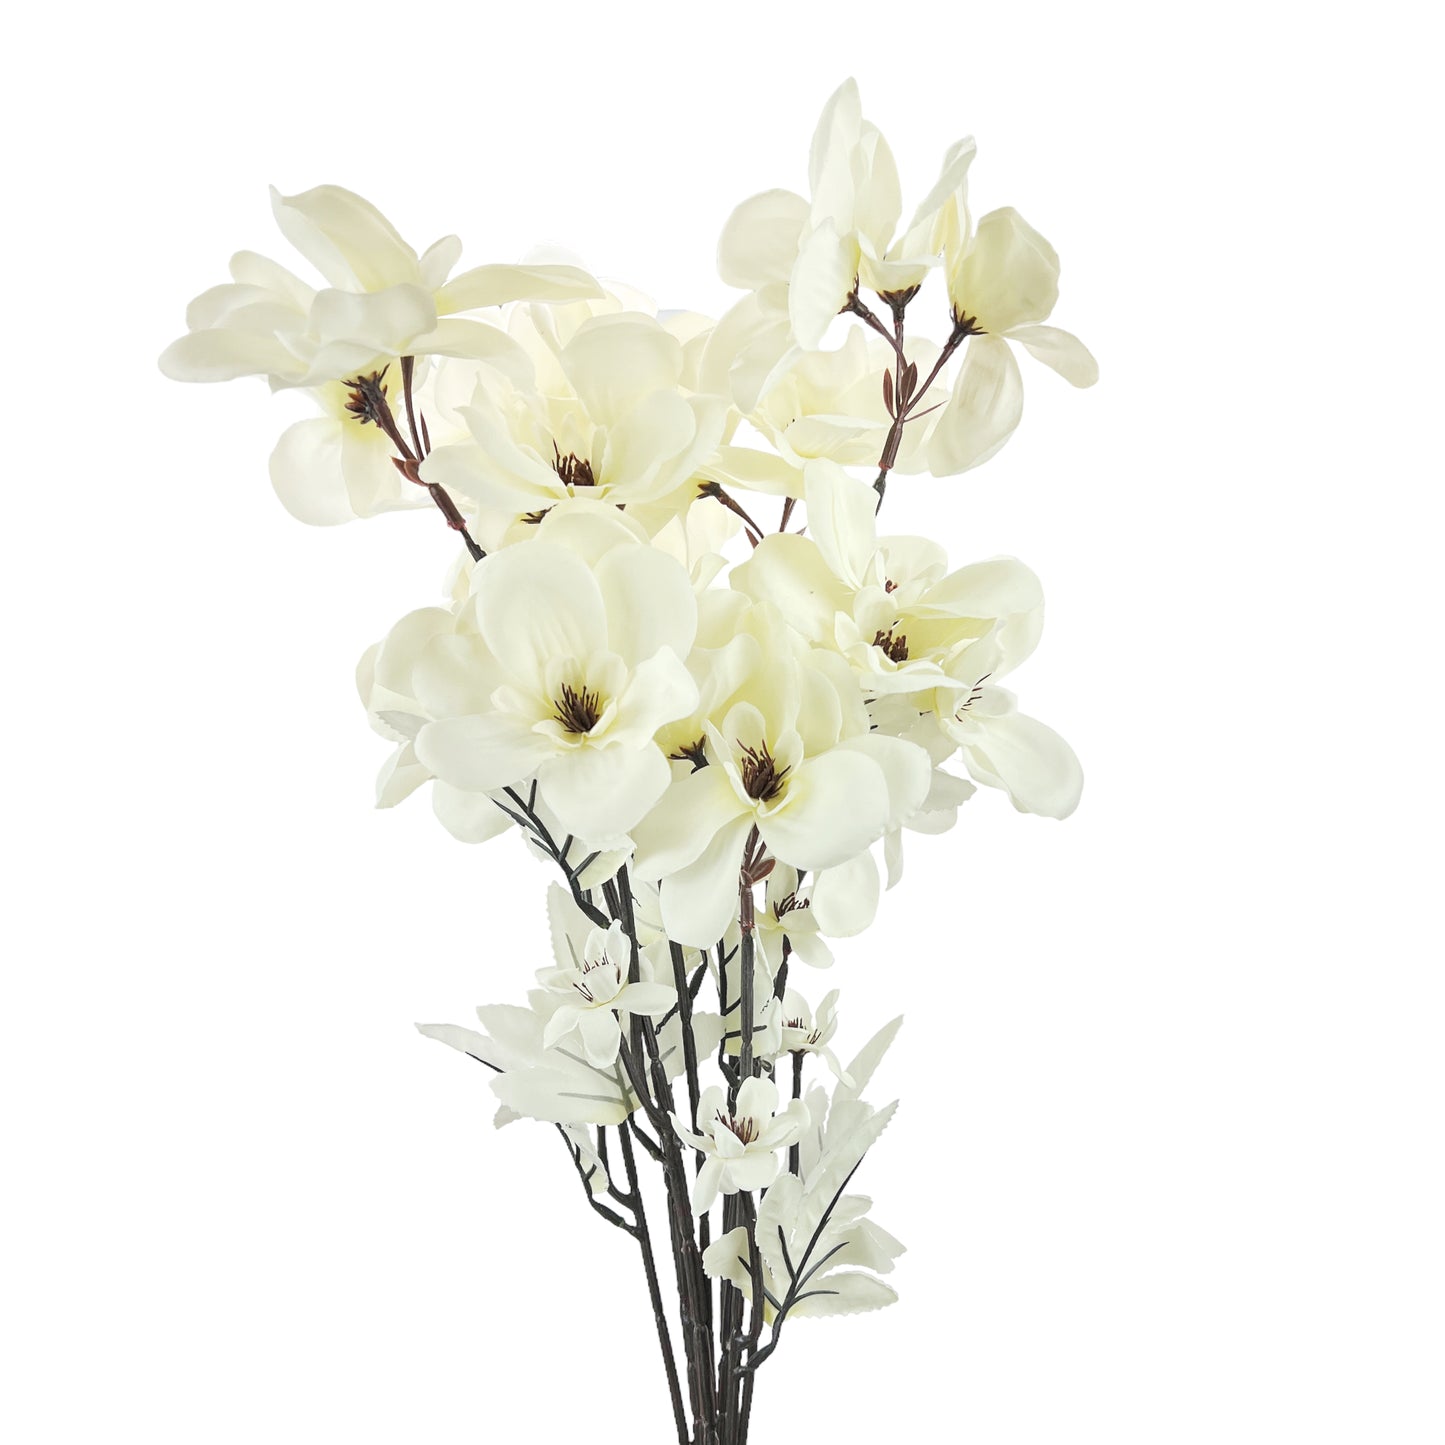 Set of 3 Artificial Freesia Flower Stems 30 inches Tall